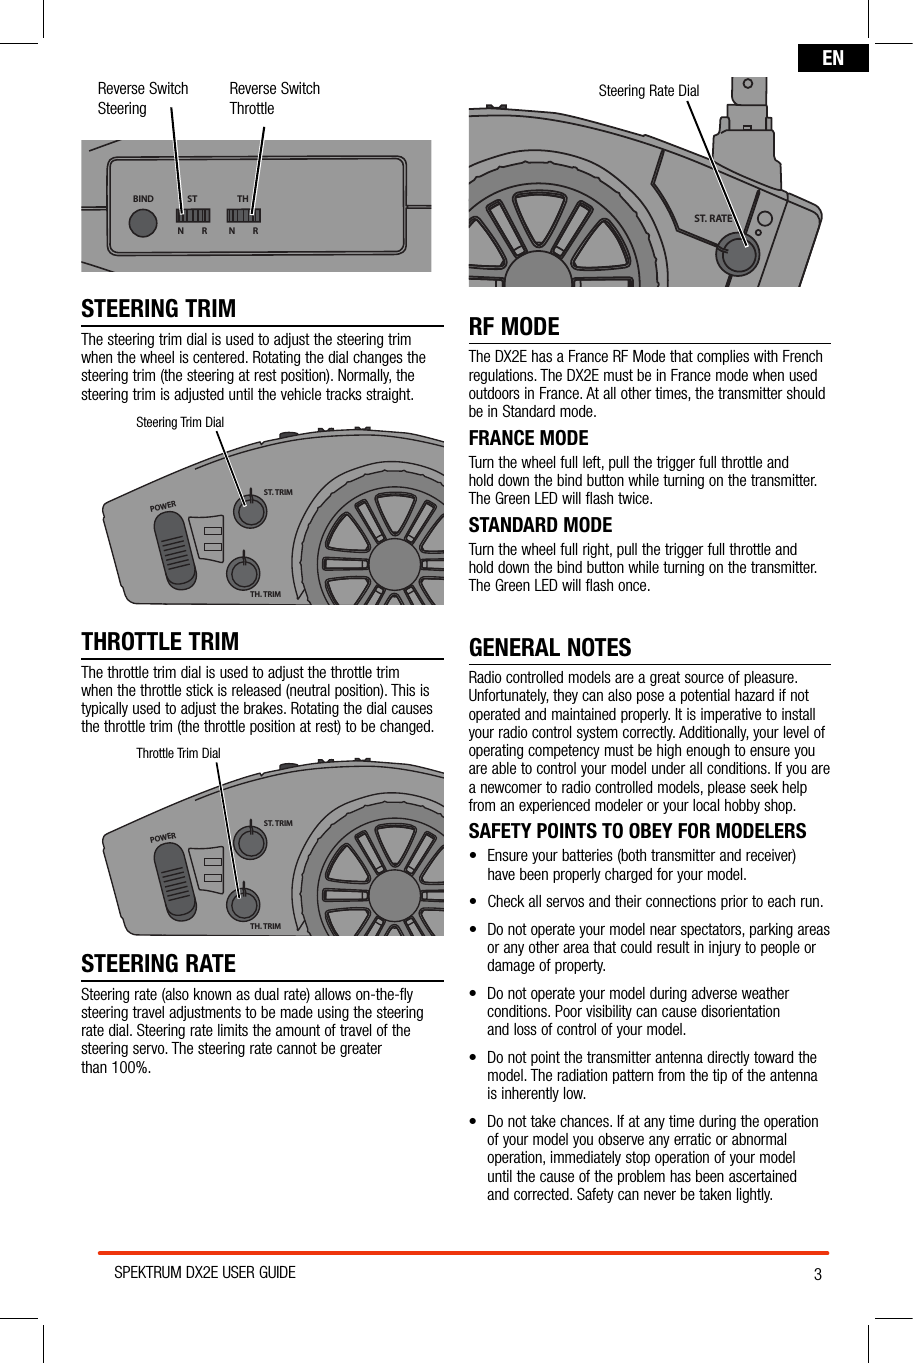 3SPEKTRUM DX2E USER GUIDEENReverse Switch SteeringReverse Switch ThrottleBIND THSTN         R N         RSTEERING TRIMThe steering trim dial is used to adjust the steering trim when the wheel is centered. Rotating the dial changes the steering trim (the steering at rest position). Normally, the steering trim is adjusted until the vehicle tracks straight.POWERST. TRIMTH. TRIMST. RATESteering Trim DialTHROTTLE TRIMThe throttle trim dial is used to adjust the throttle trim when the throttle stick is released (neutral position). This is typically used to adjust the brakes. Rotating the dial causes the throttle trim (the throttle position at rest) to be changed.POWERST. TRIMTH. TRIMST. RATEThrottle Trim DialSTEERING RATESteering rate (also known as dual rate) allows on-the-fly  steering travel adjustments to be made using the steering  rate dial. Steering rate limits the amount of travel of the steering servo. The steering rate cannot be greater  than 100%.POWERST. TRIMTH. TRIMST. RATESteering Rate DialRF MODEThe DX2E has a France RF Mode that complies with French regulations. The DX2E must be in France mode when used outdoors in France. At all other times, the transmitter should  be in Standard mode. FRANCE MODETurn the wheel full left, pull the trigger full throttle and  hold down the bind button while turning on the transmitter.  The Green LED will flash twice.STANDARD MODETurn the wheel full right, pull the trigger full throttle and  hold down the bind button while turning on the transmitter.  The Green LED will flash once.GENERAL NOTESRadio controlled models are a great source of pleasure. Unfortunately, they can also pose a potential hazard if not operated and maintained properly. It is imperative to install your radio control system correctly. Additionally, your level of operating competency must be high enough to ensure you are able to control your model under all conditions. If you are a newcomer to radio controlled models, please seek help from an experienced modeler or your local hobby shop.SAFETY POINTS TO OBEY FOR MODELERS• Ensureyourbatteries(bothtransmitterandreceiver) have been properly charged for your model.• Checkallservosandtheirconnectionspriortoeachrun.• Donotoperateyourmodelnearspectators,parkingareas or any other area that could result in injury to people or damage of property.• Donotoperateyourmodelduringadverseweatherconditions. Poor visibility can cause disorientation  and loss of control of your model.• Donotpointthetransmitterantennadirectlytowardthemodel. The radiation pattern from the tip of the antenna  is inherently low.• Donottakechances.Ifatanytimeduringtheoperation of your model you observe any erratic or abnormal operation, immediately stop operation of your model  until the cause of the problem has been ascertained  and corrected. Safety can never be taken lightly.